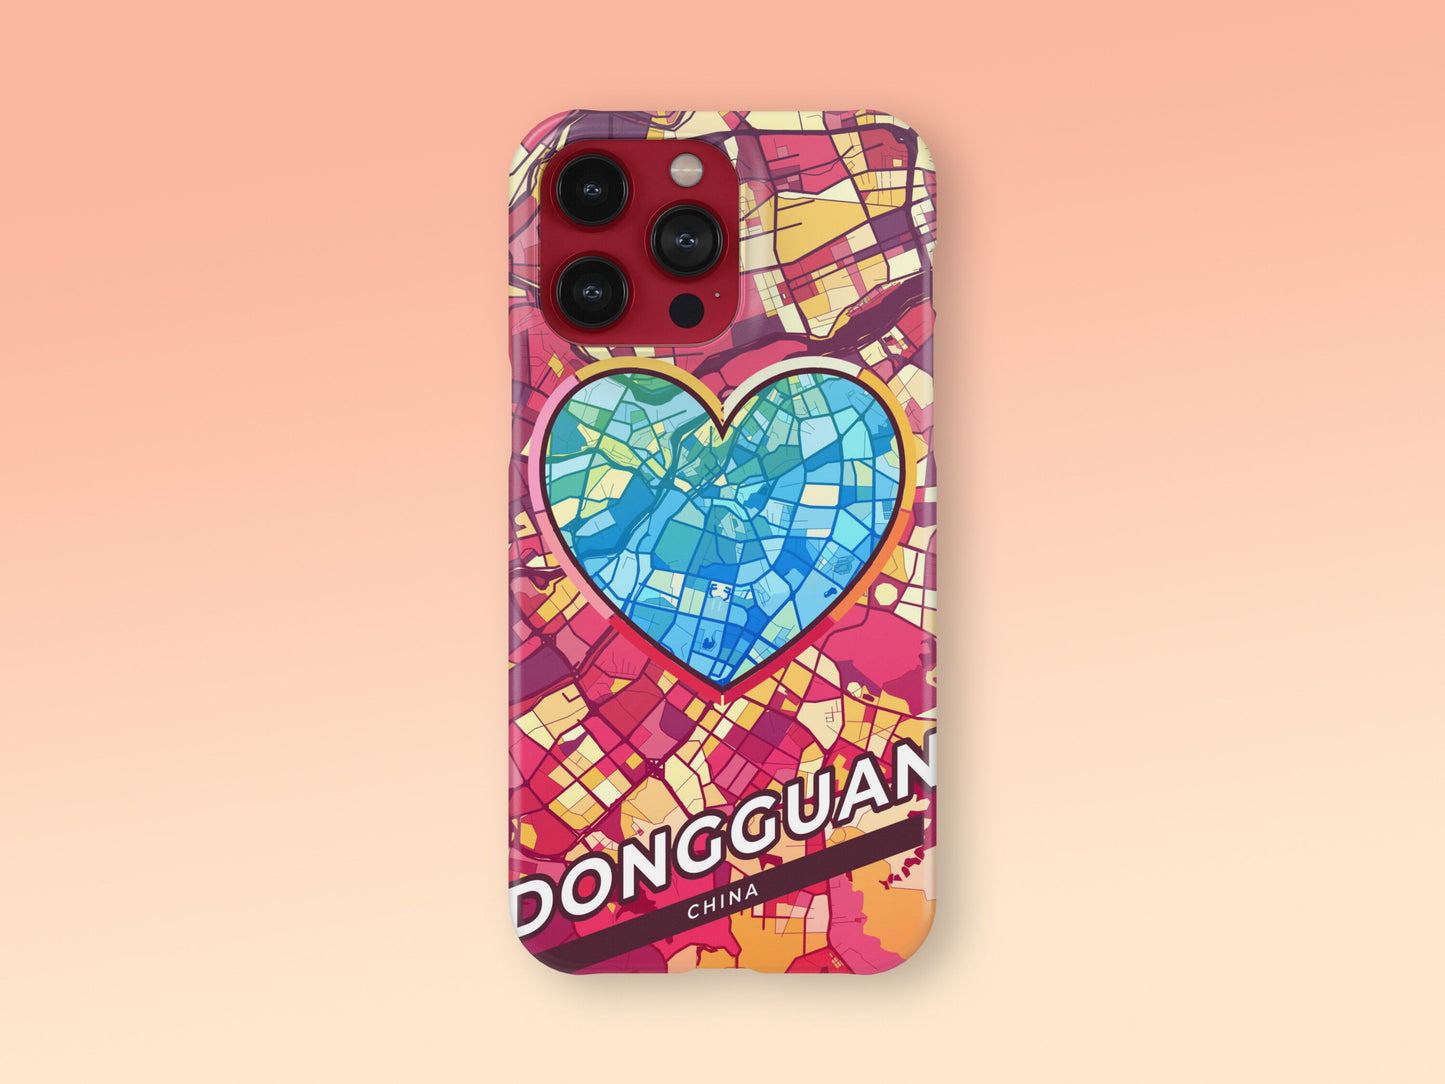 Dongguan China slim phone case with colorful icon. Birthday, wedding or housewarming gift. Couple match cases. 2